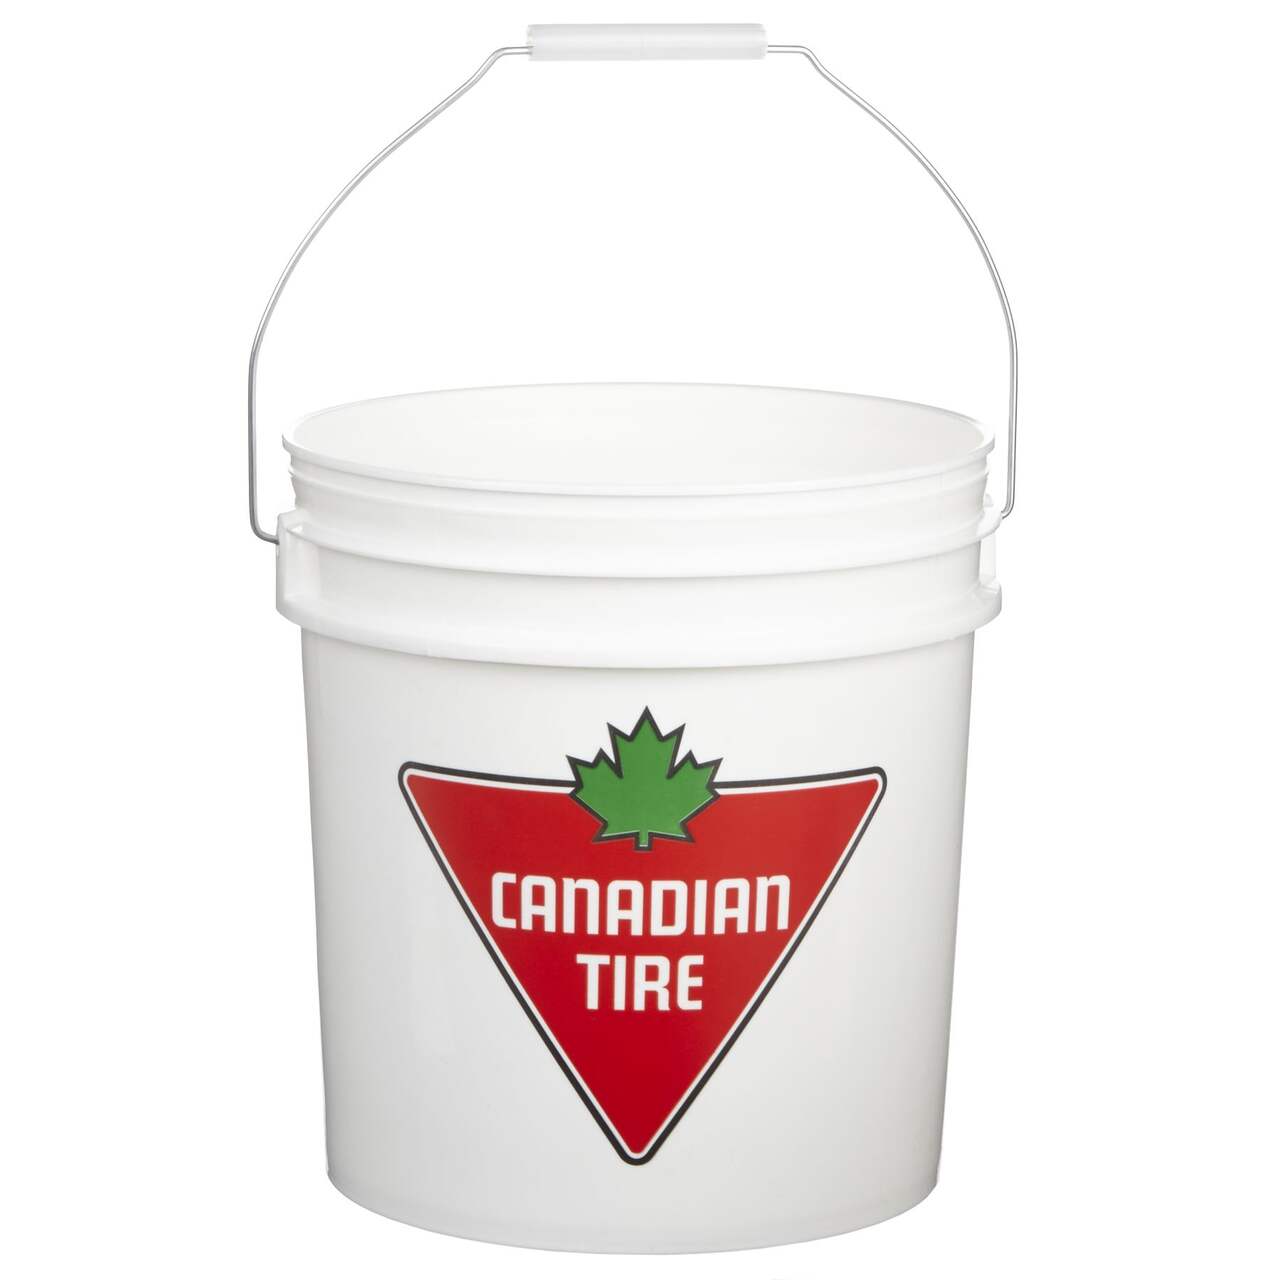 5 Gallon Bucket Dimensions - Height, Weight, Capacity, and FAQ